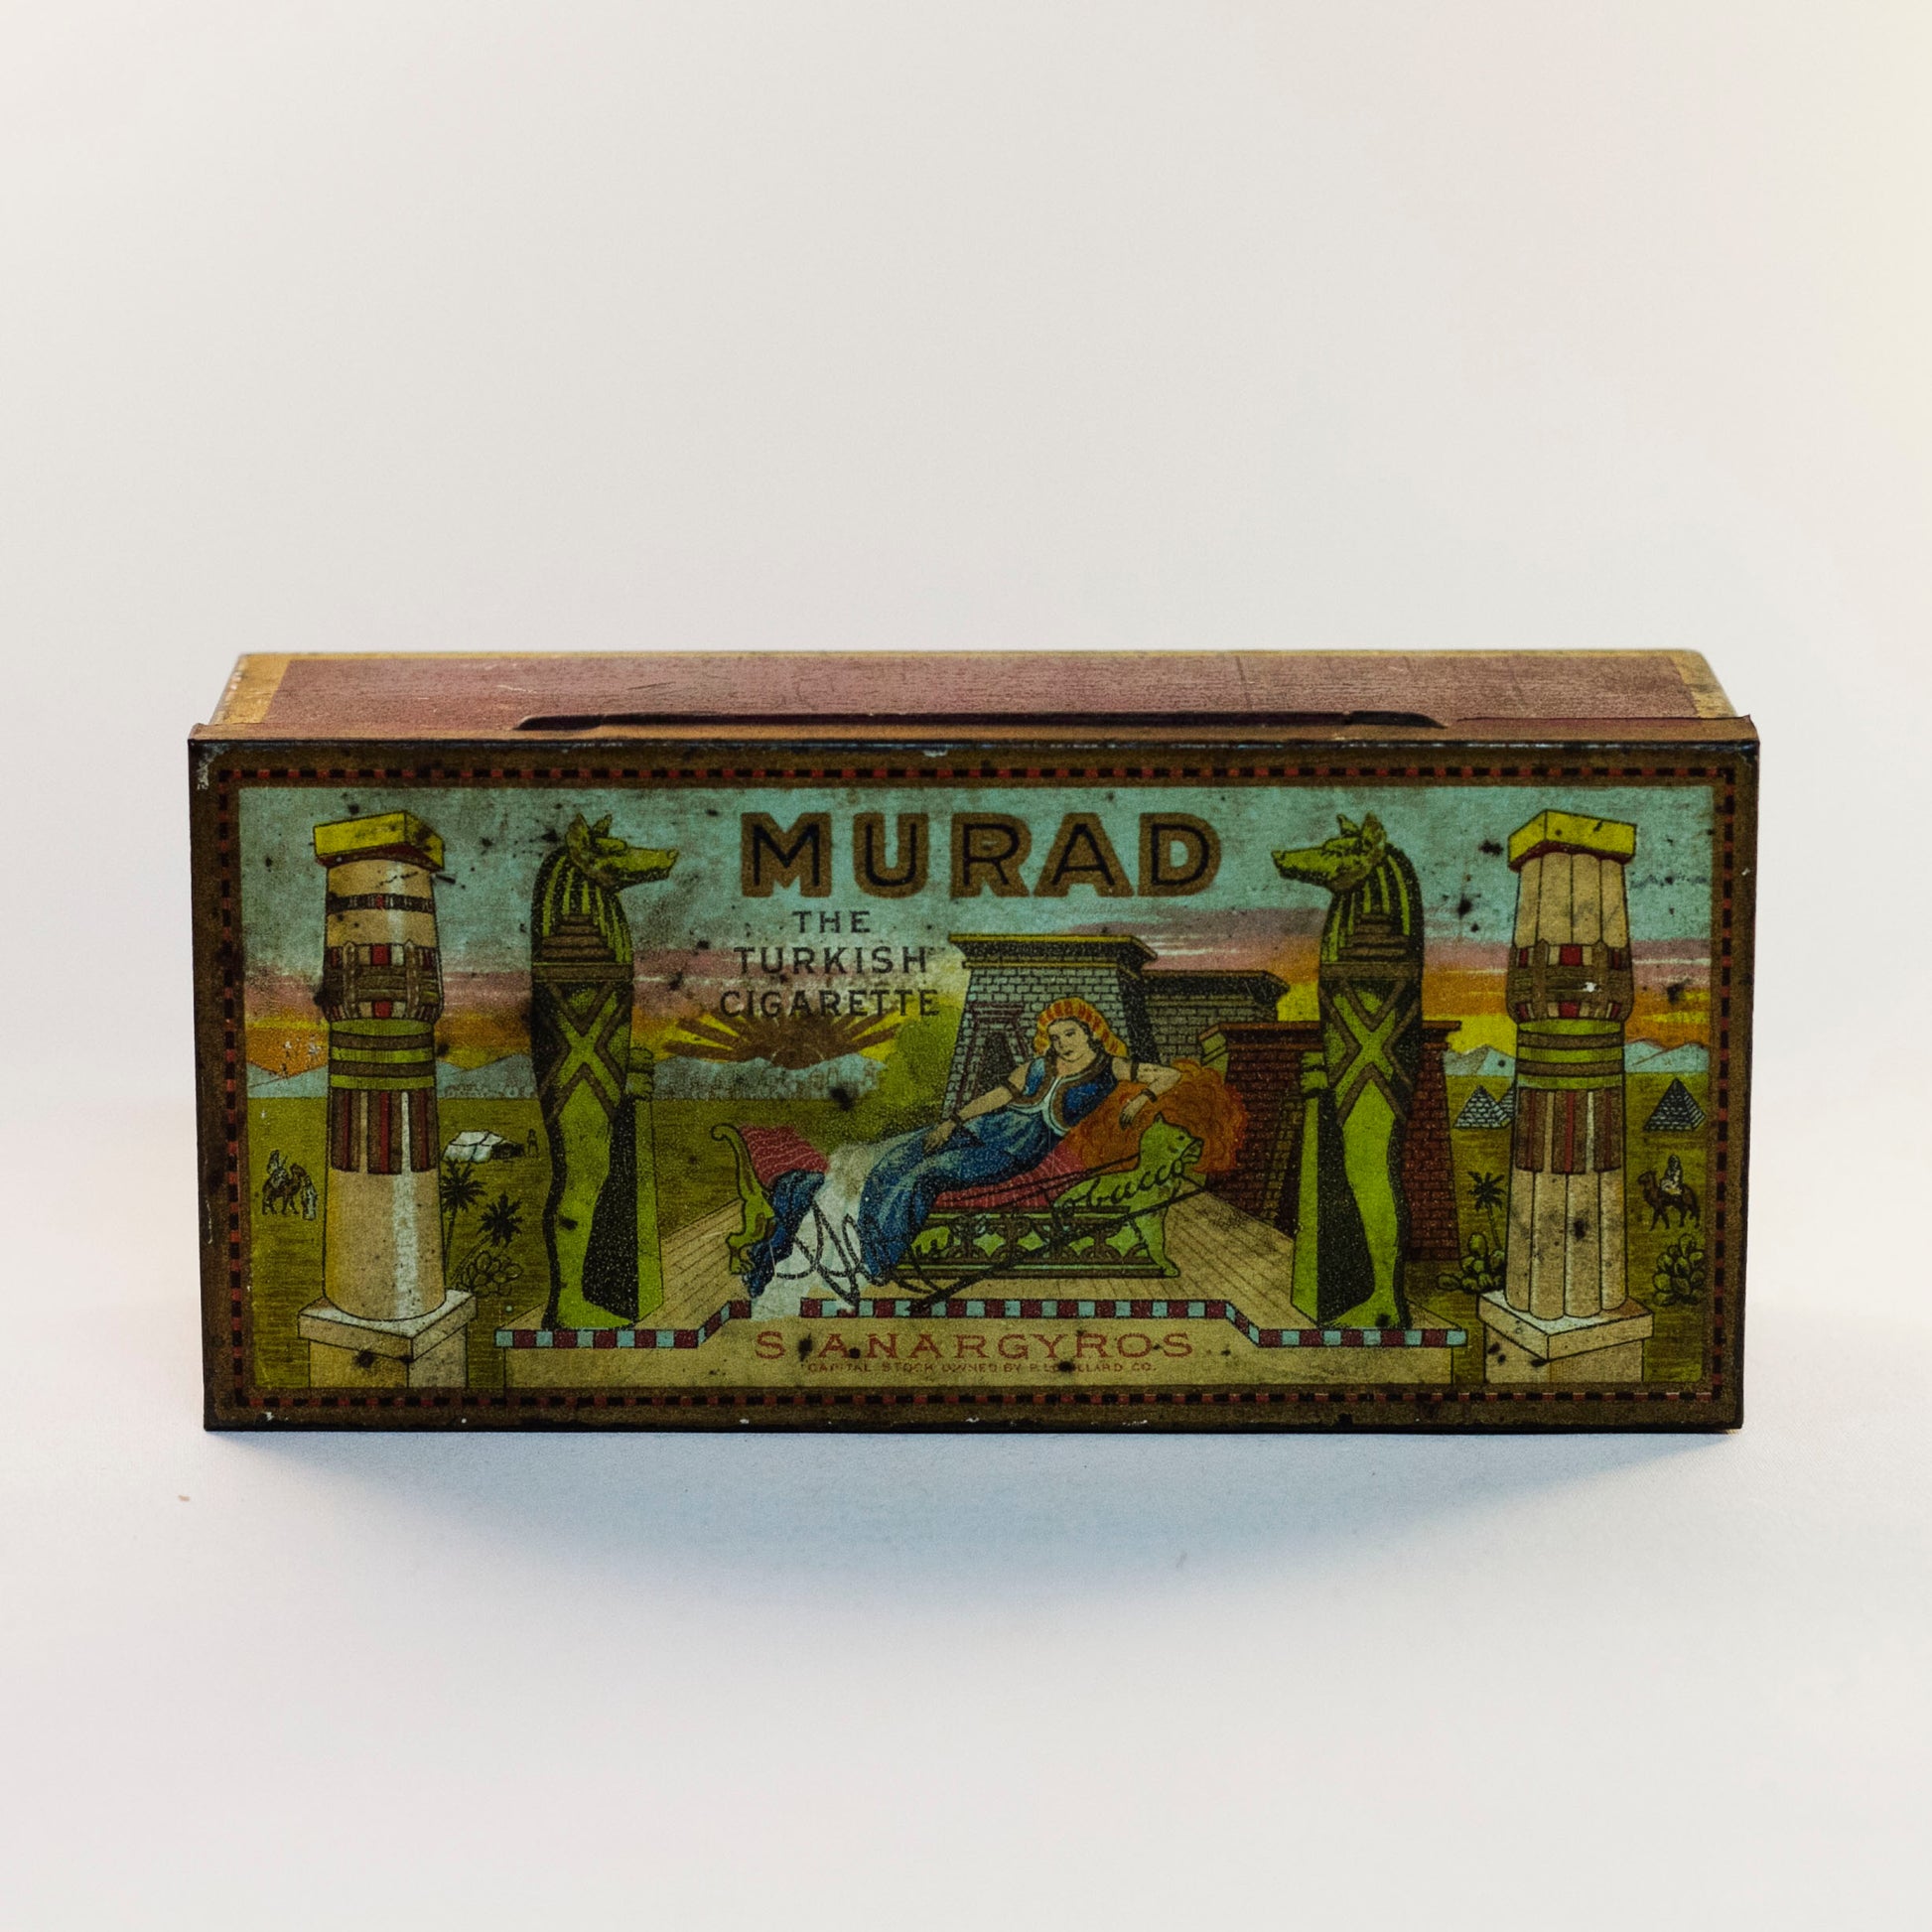 MURAD THE TURKISH CIGARETTE TIN Early Orientalist Themed Lithograph Produced by S. Anargyros Circa Early 1900s